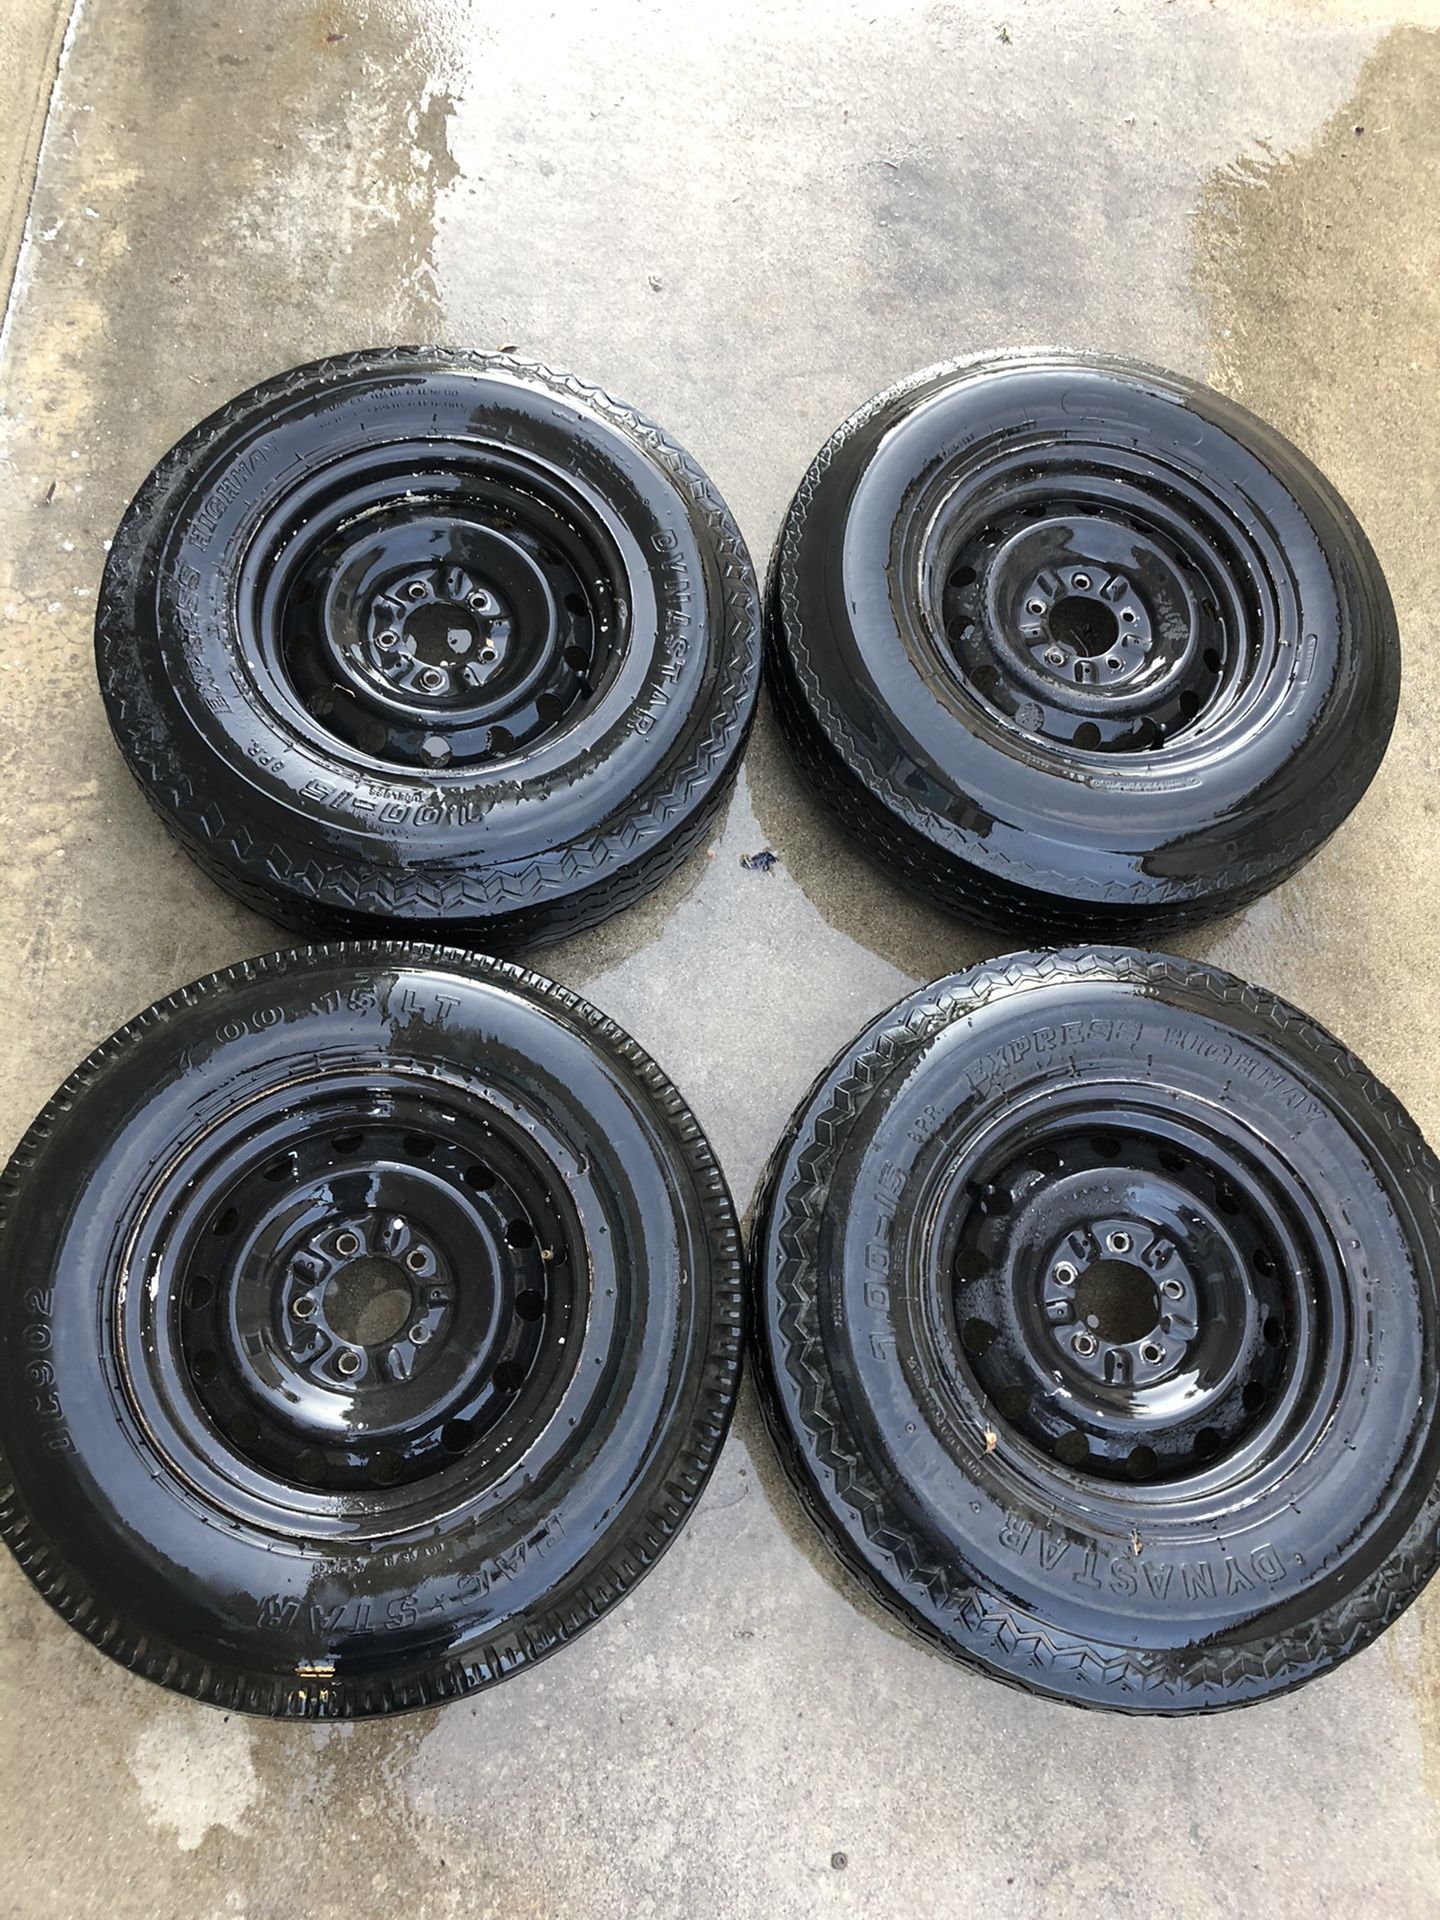 Trailer wheels and tire